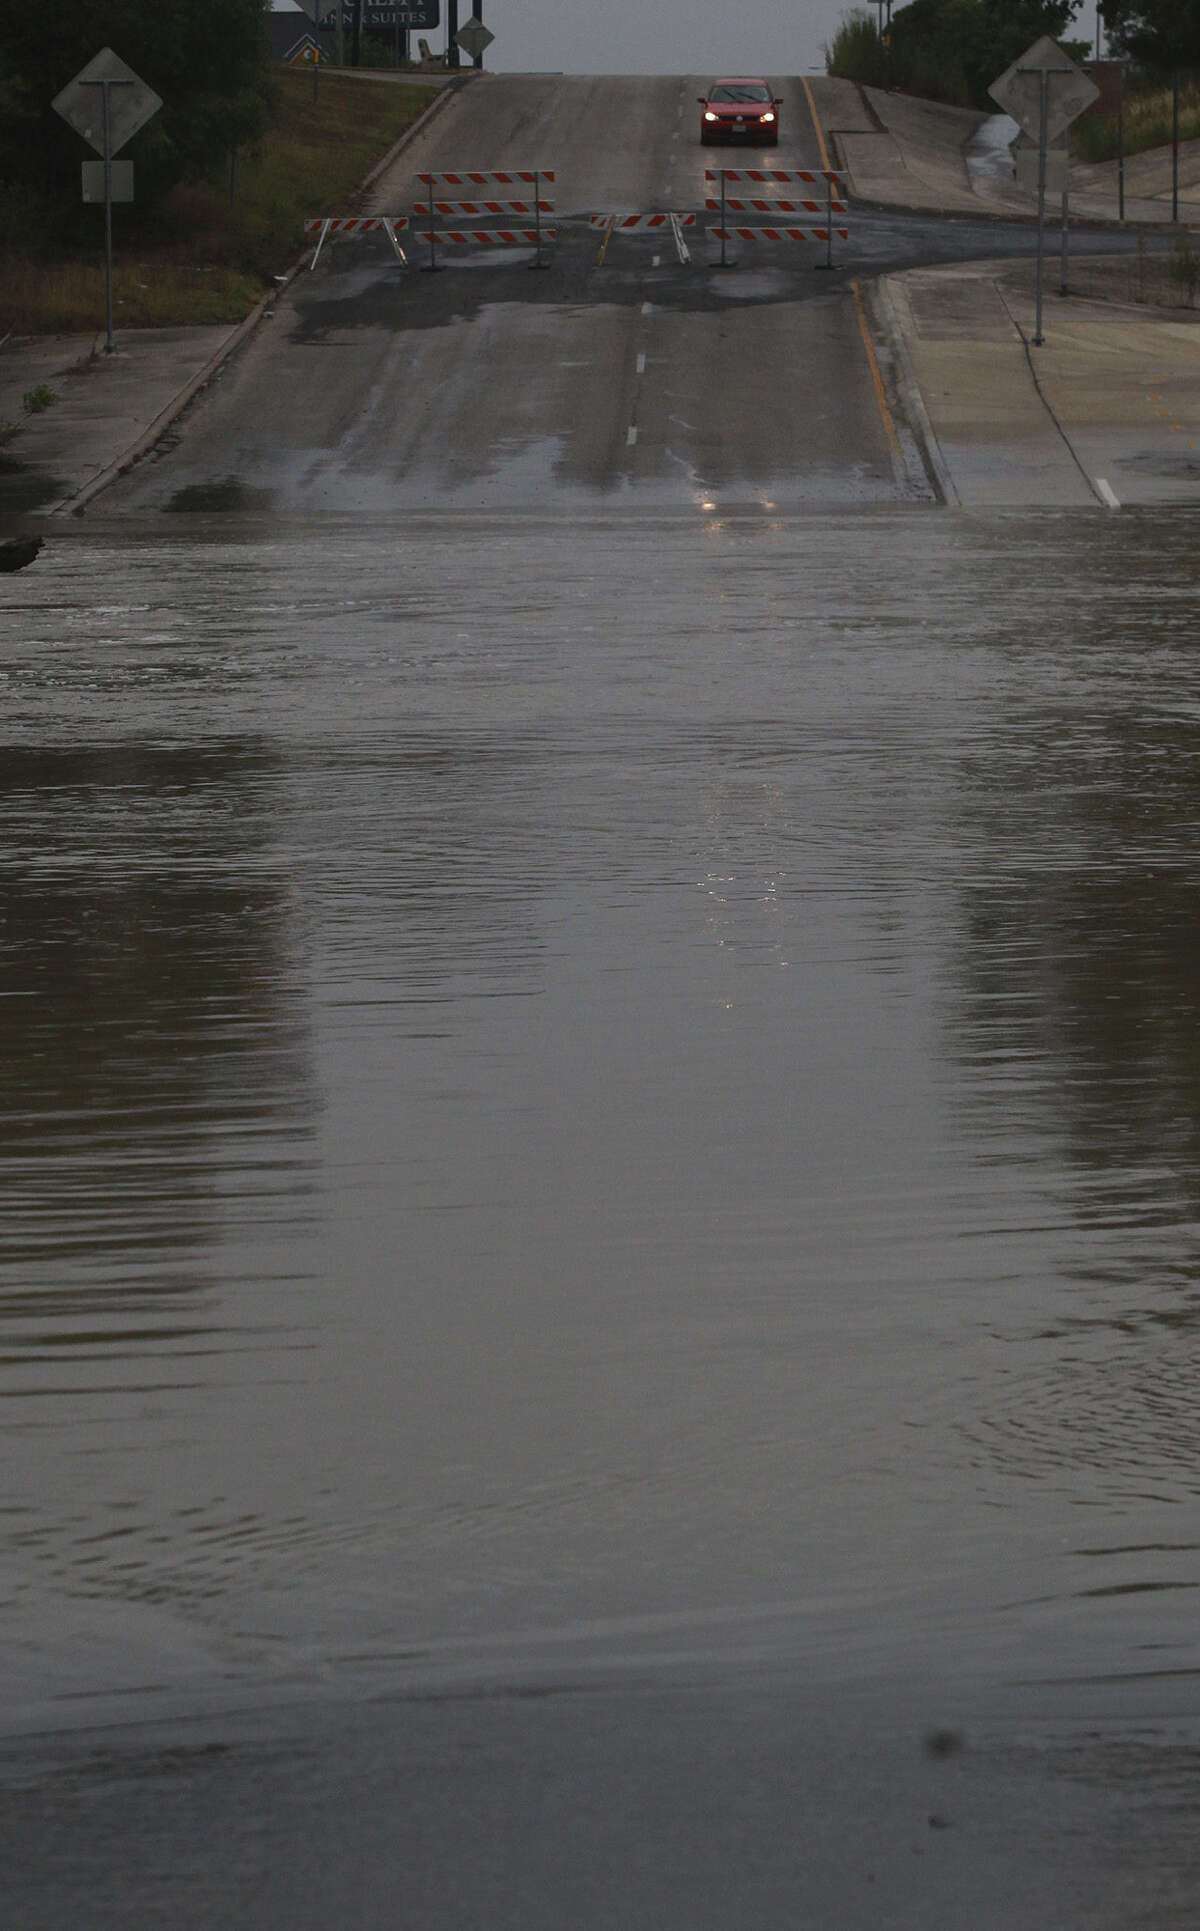 A motorist pauses near debris in the road close to Salado Creek and Interstate 35 after the area flooded from the thunder- storm. Heavy rain caused many San Antonio roads to be shut down late Monday and into Tuesday.